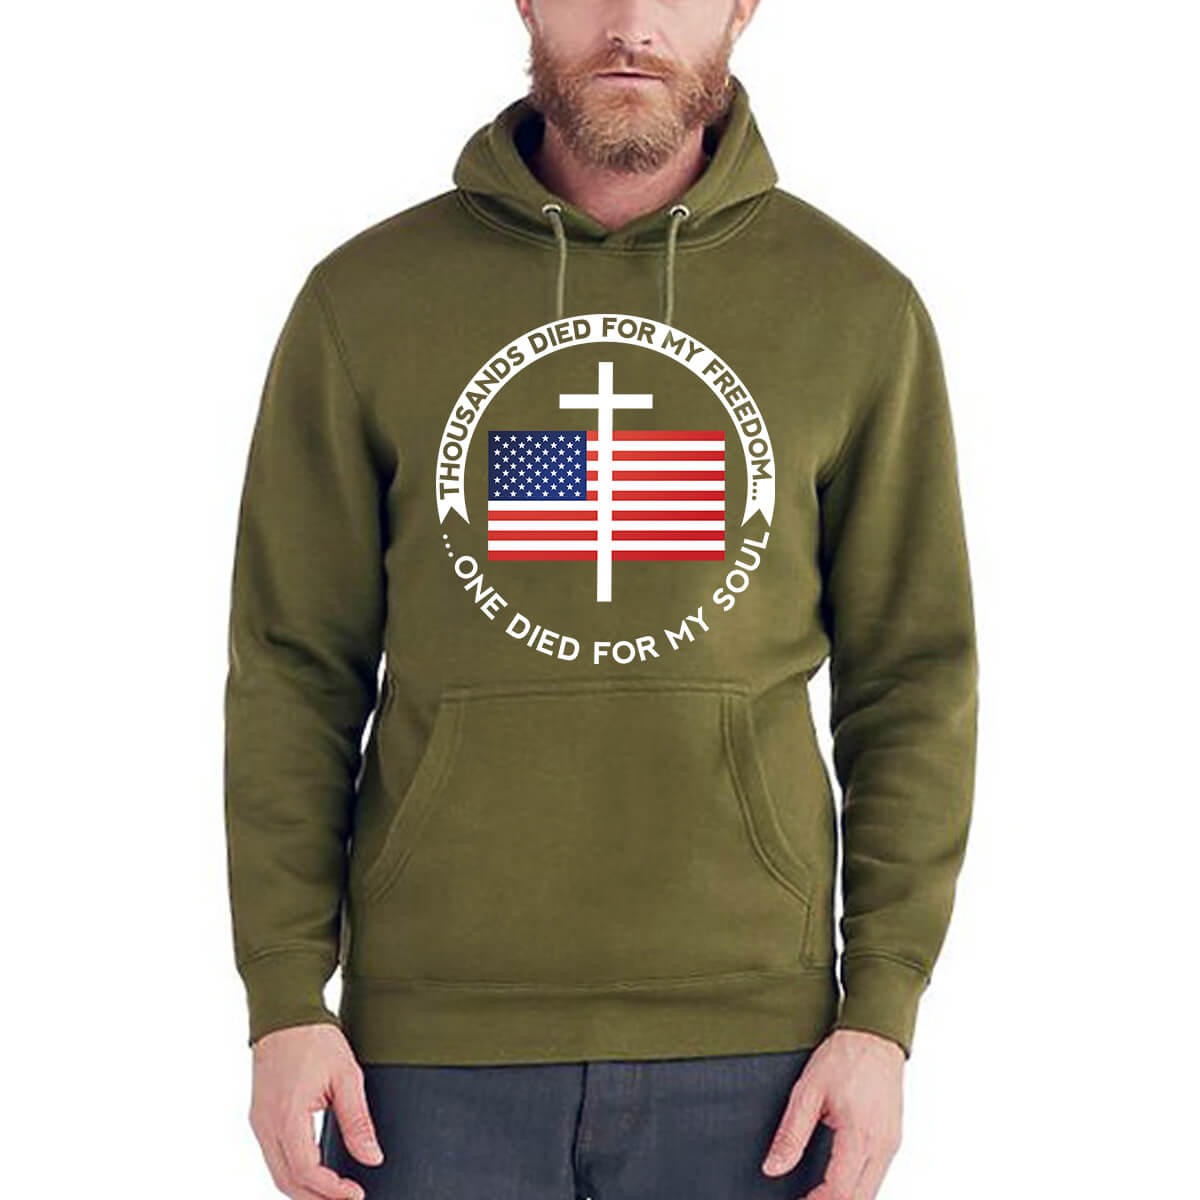 Thousands Died For My Freedom One Died For My Soul Men's Sweatshirt Hoodie